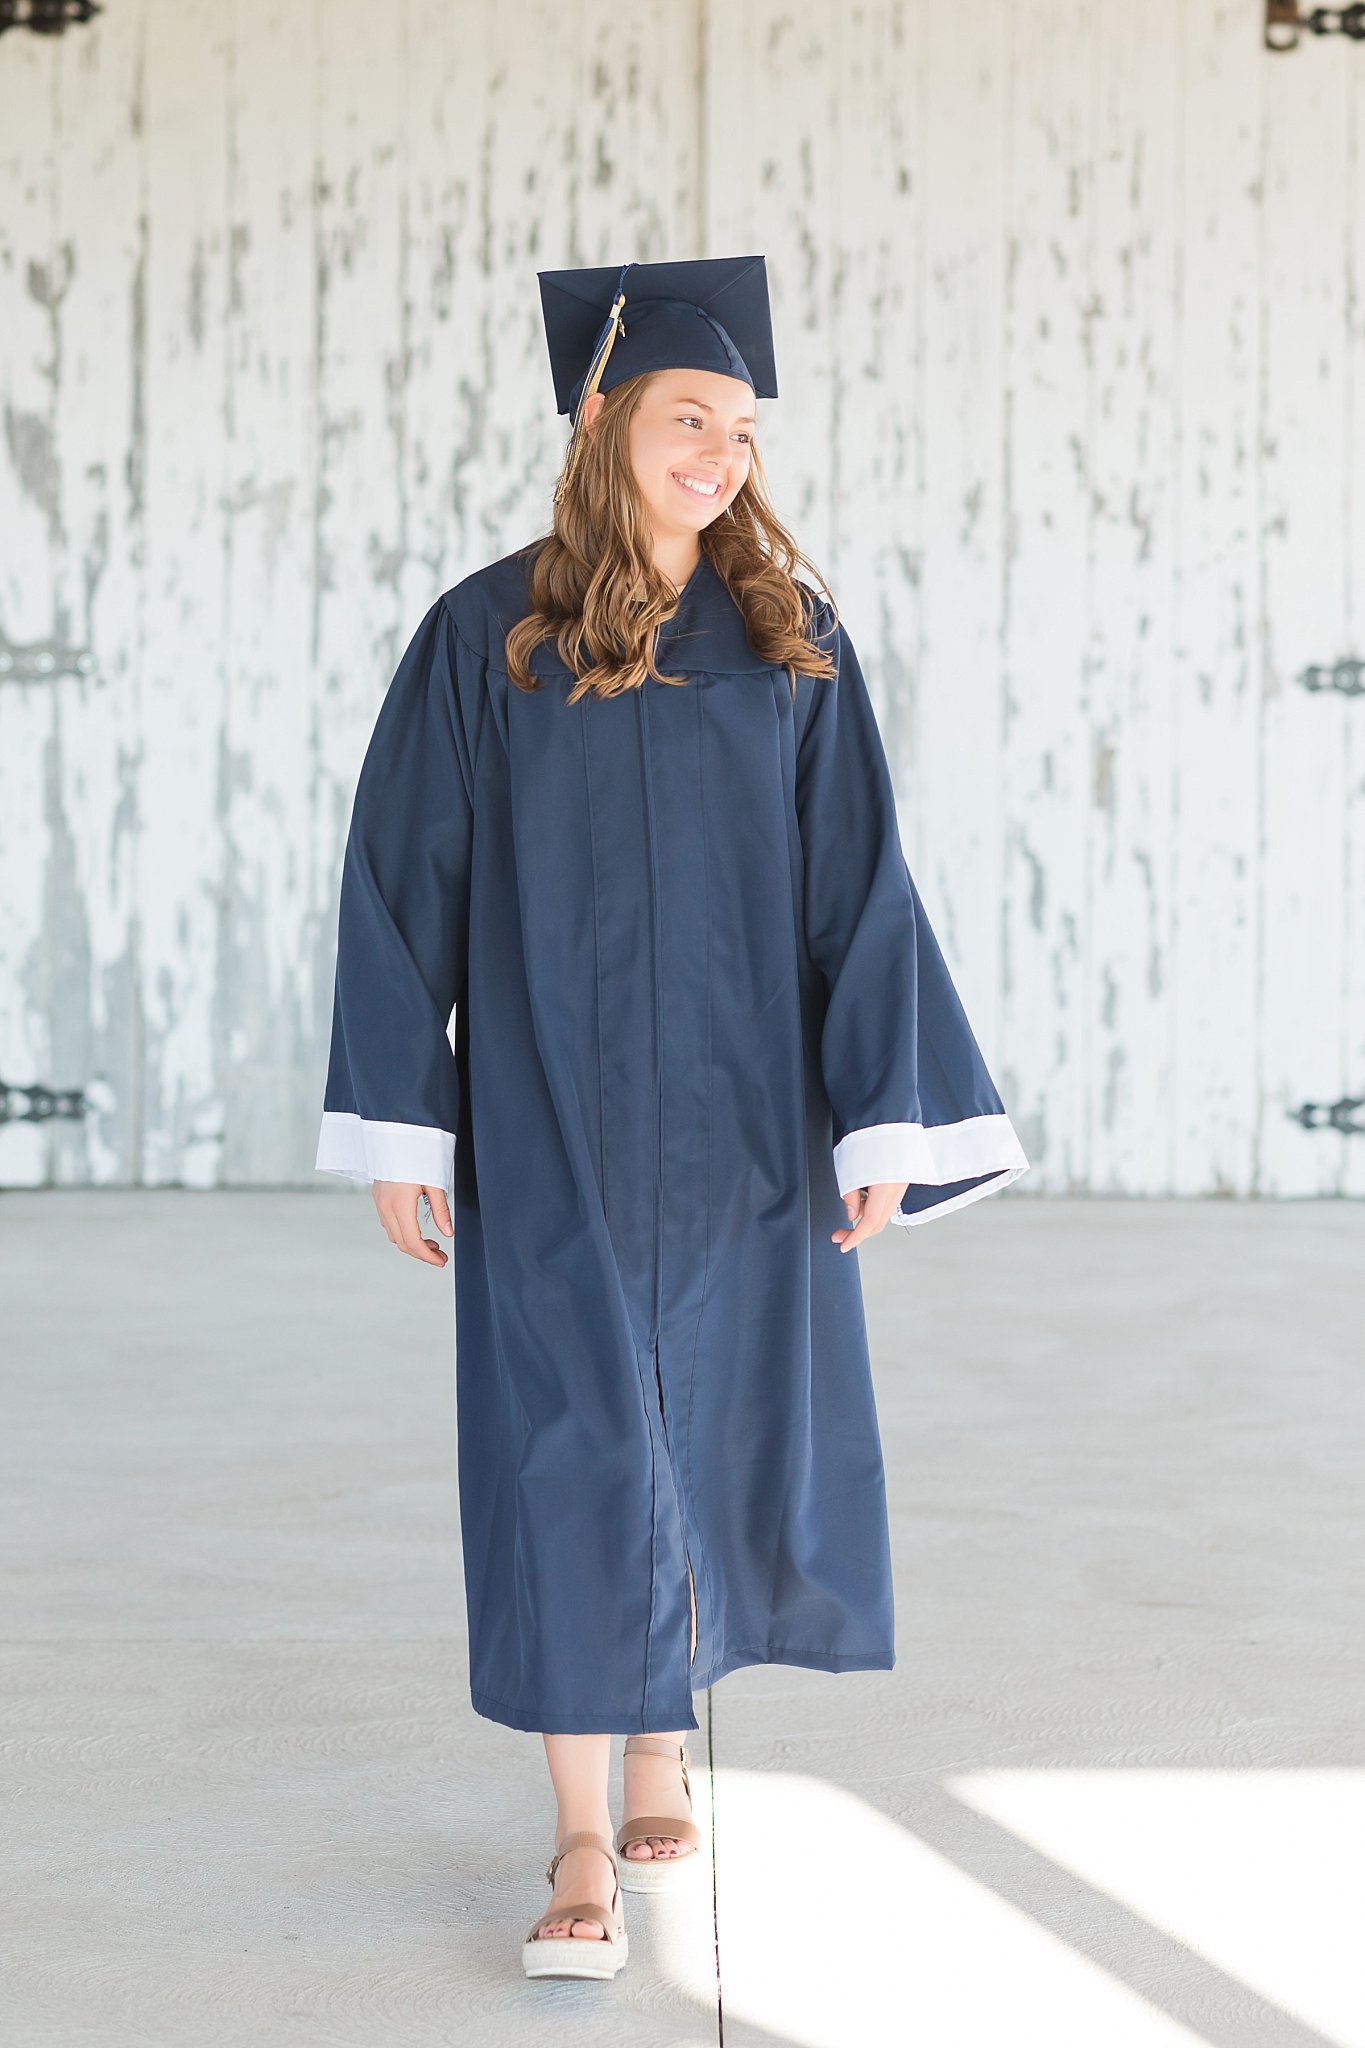 Cap and Gown Mini Sessions photos by Simply Seeking Photography